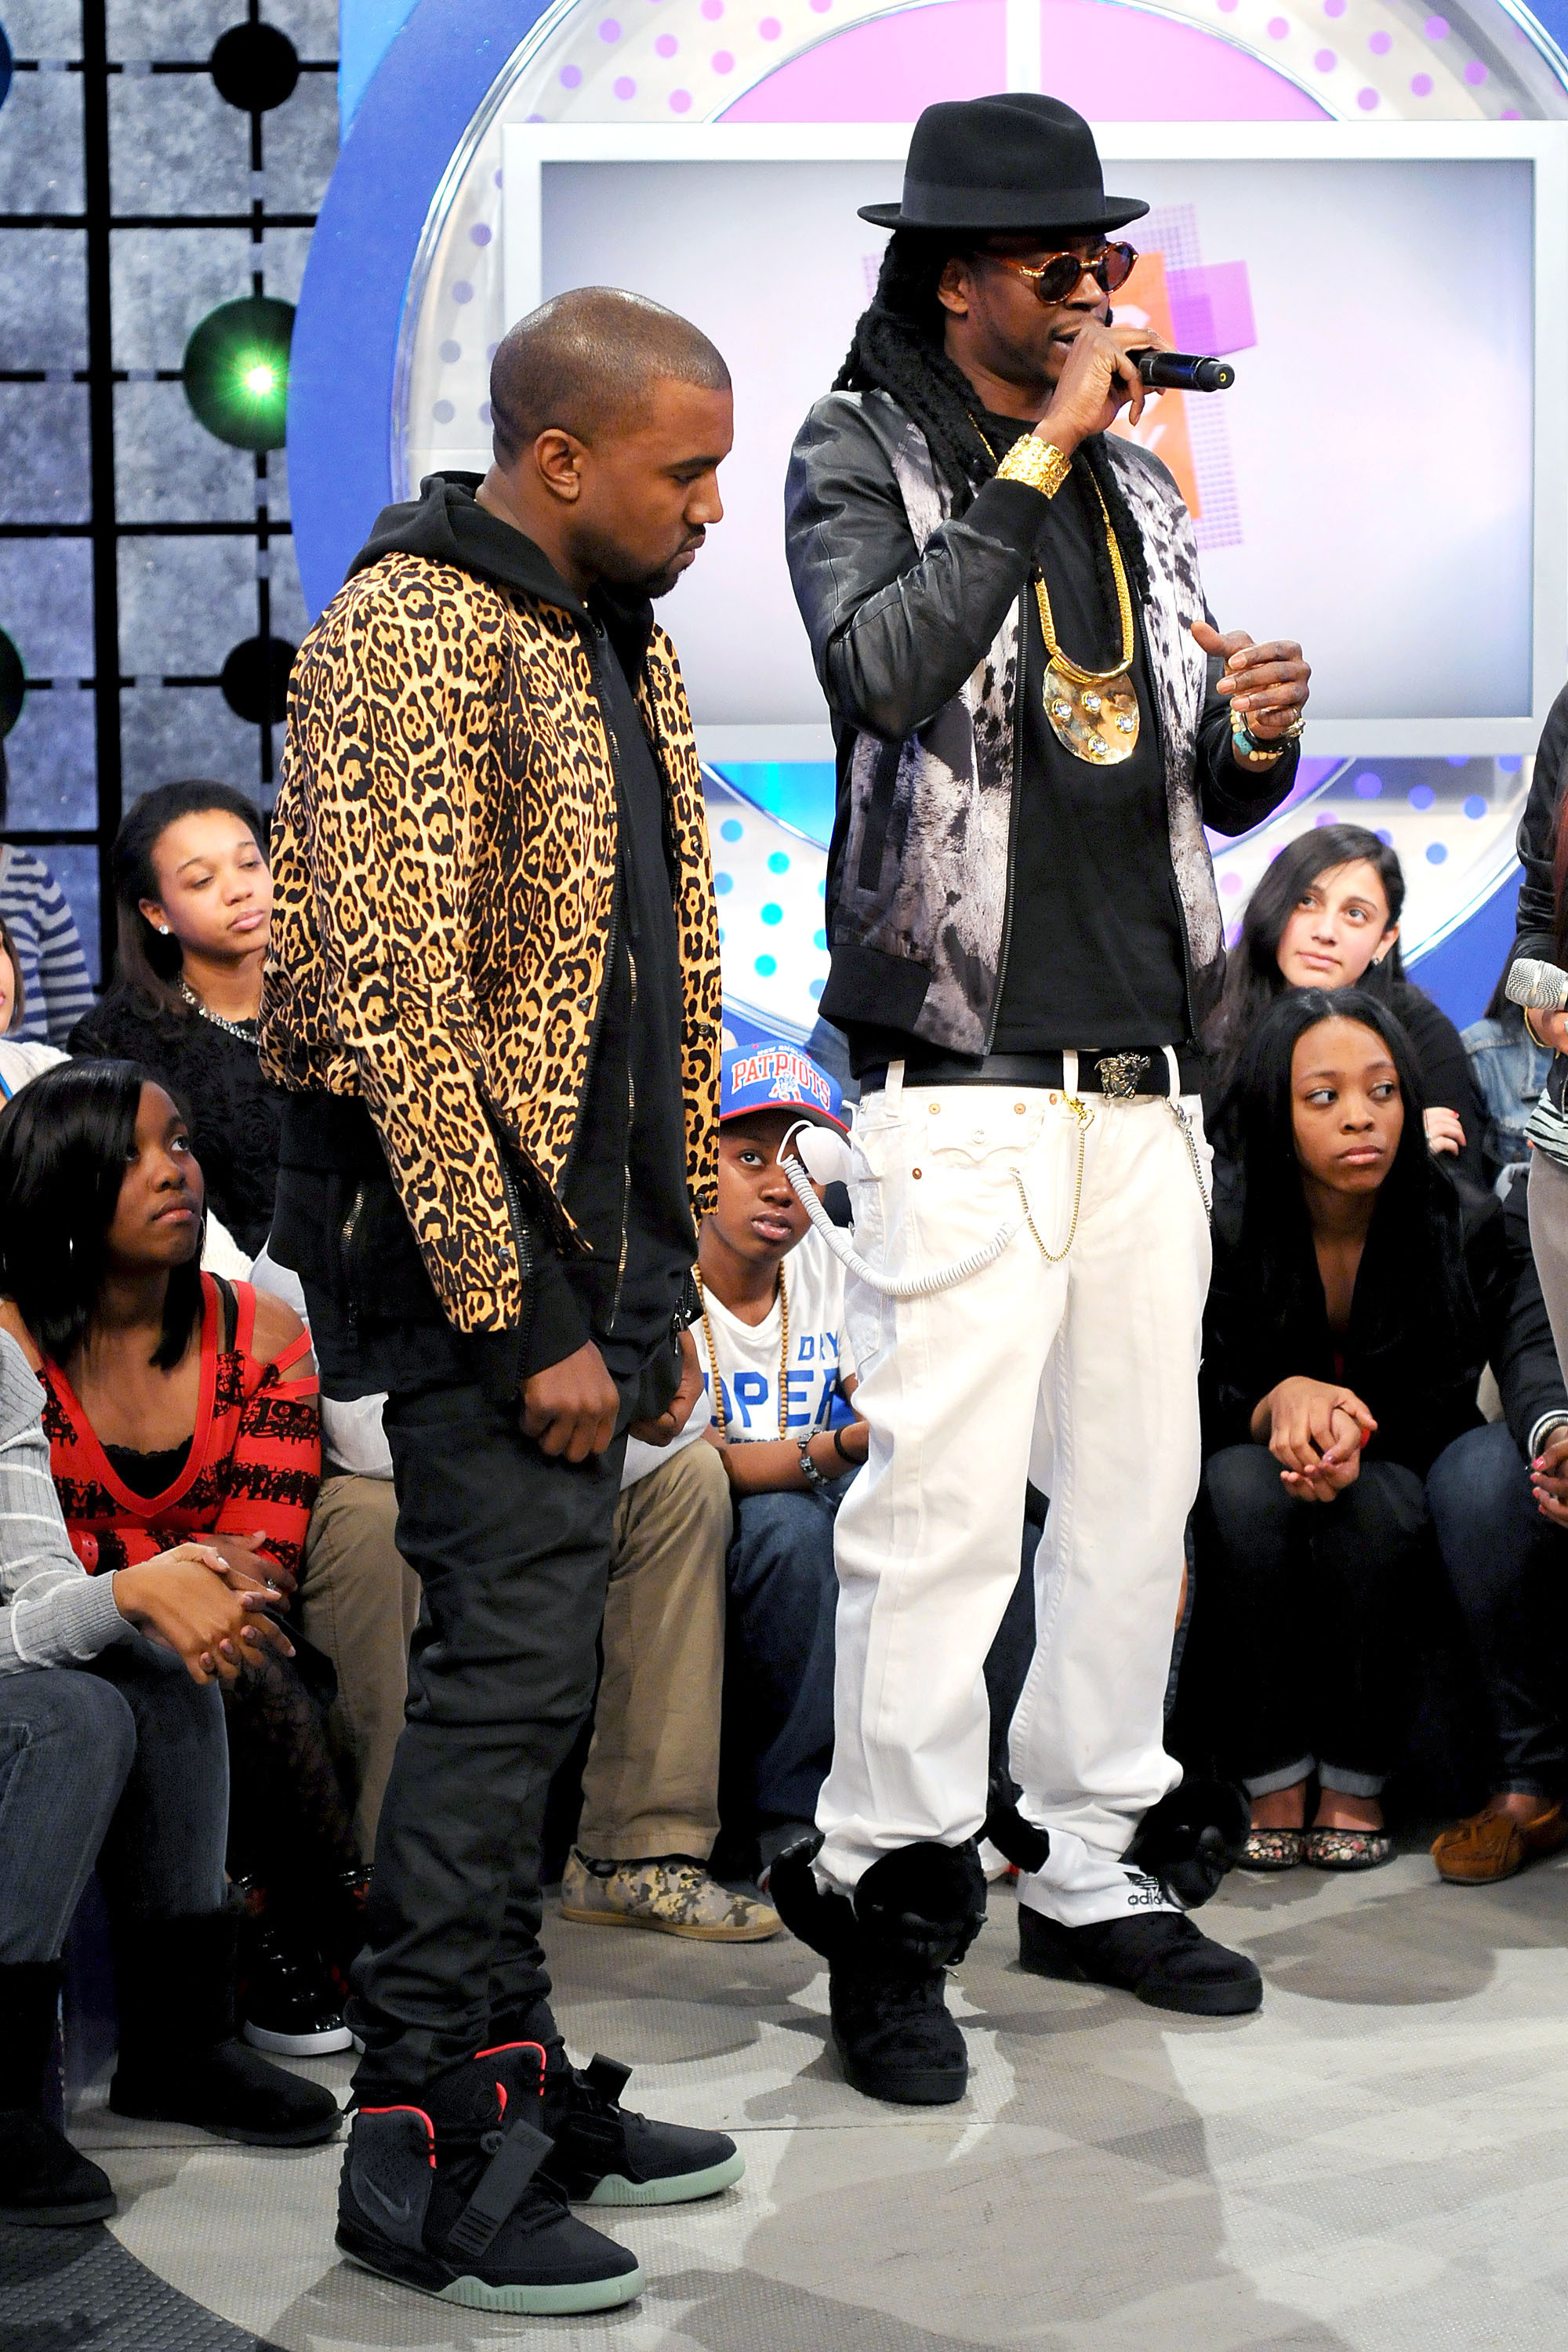 Kanye West appearing on BET's '106 and Park'.